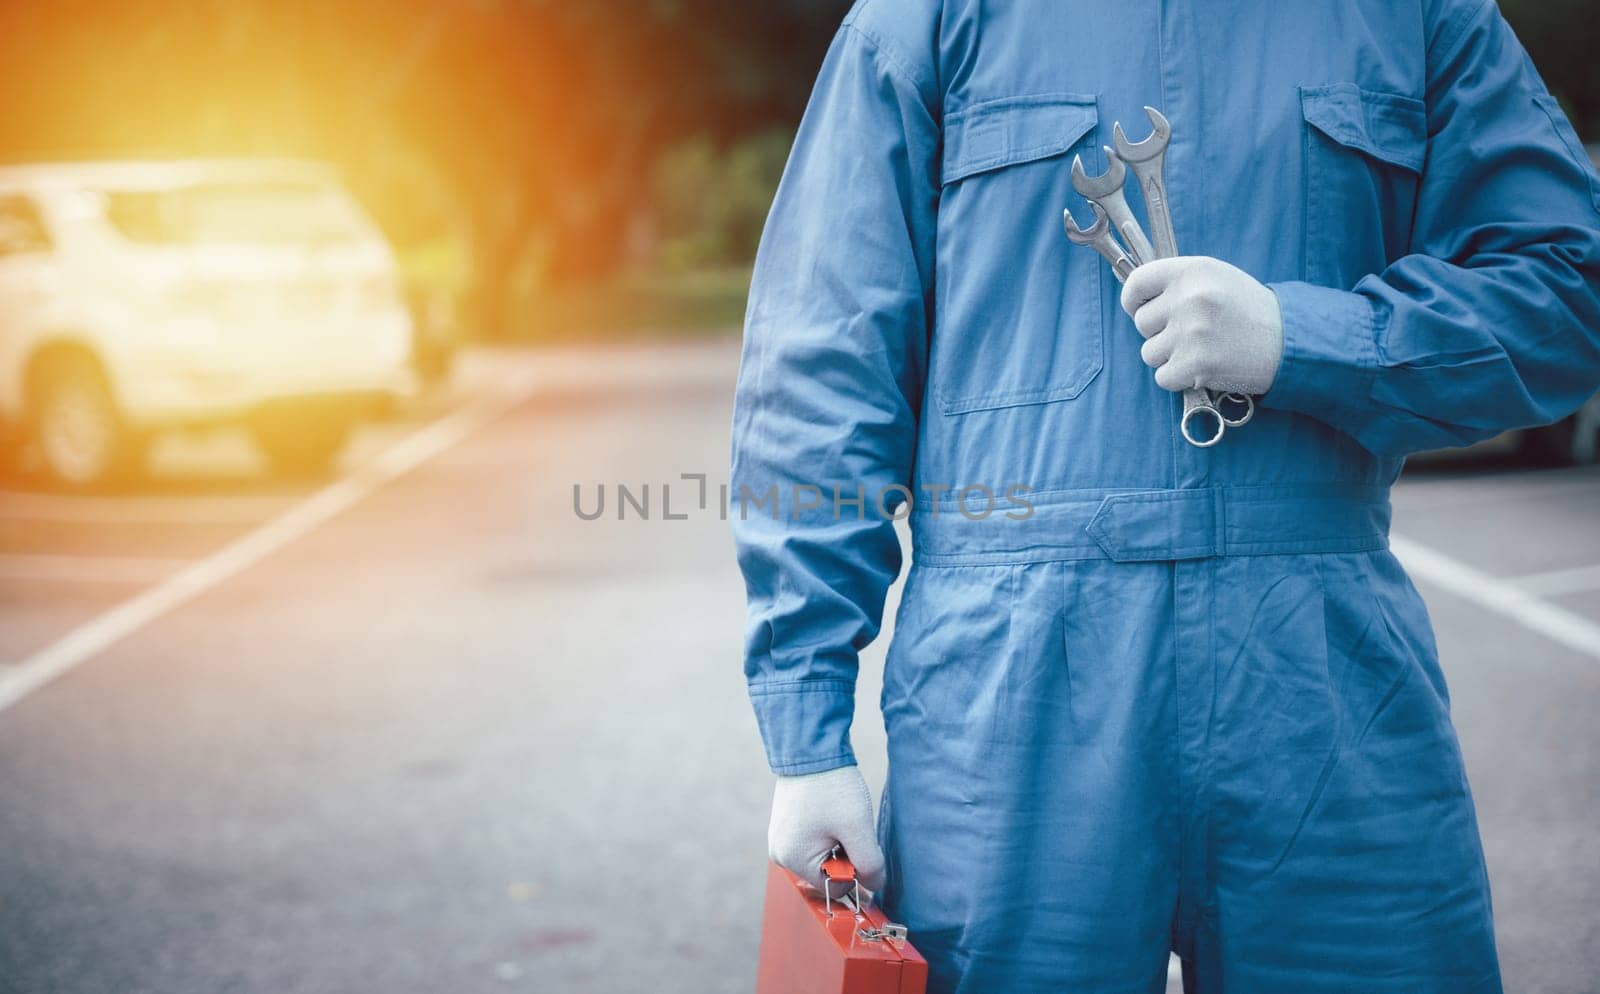 Skilled car mechanic at work on the road, holding a large wrench with hands clad in blue workwear. Close-up shot of the hands.